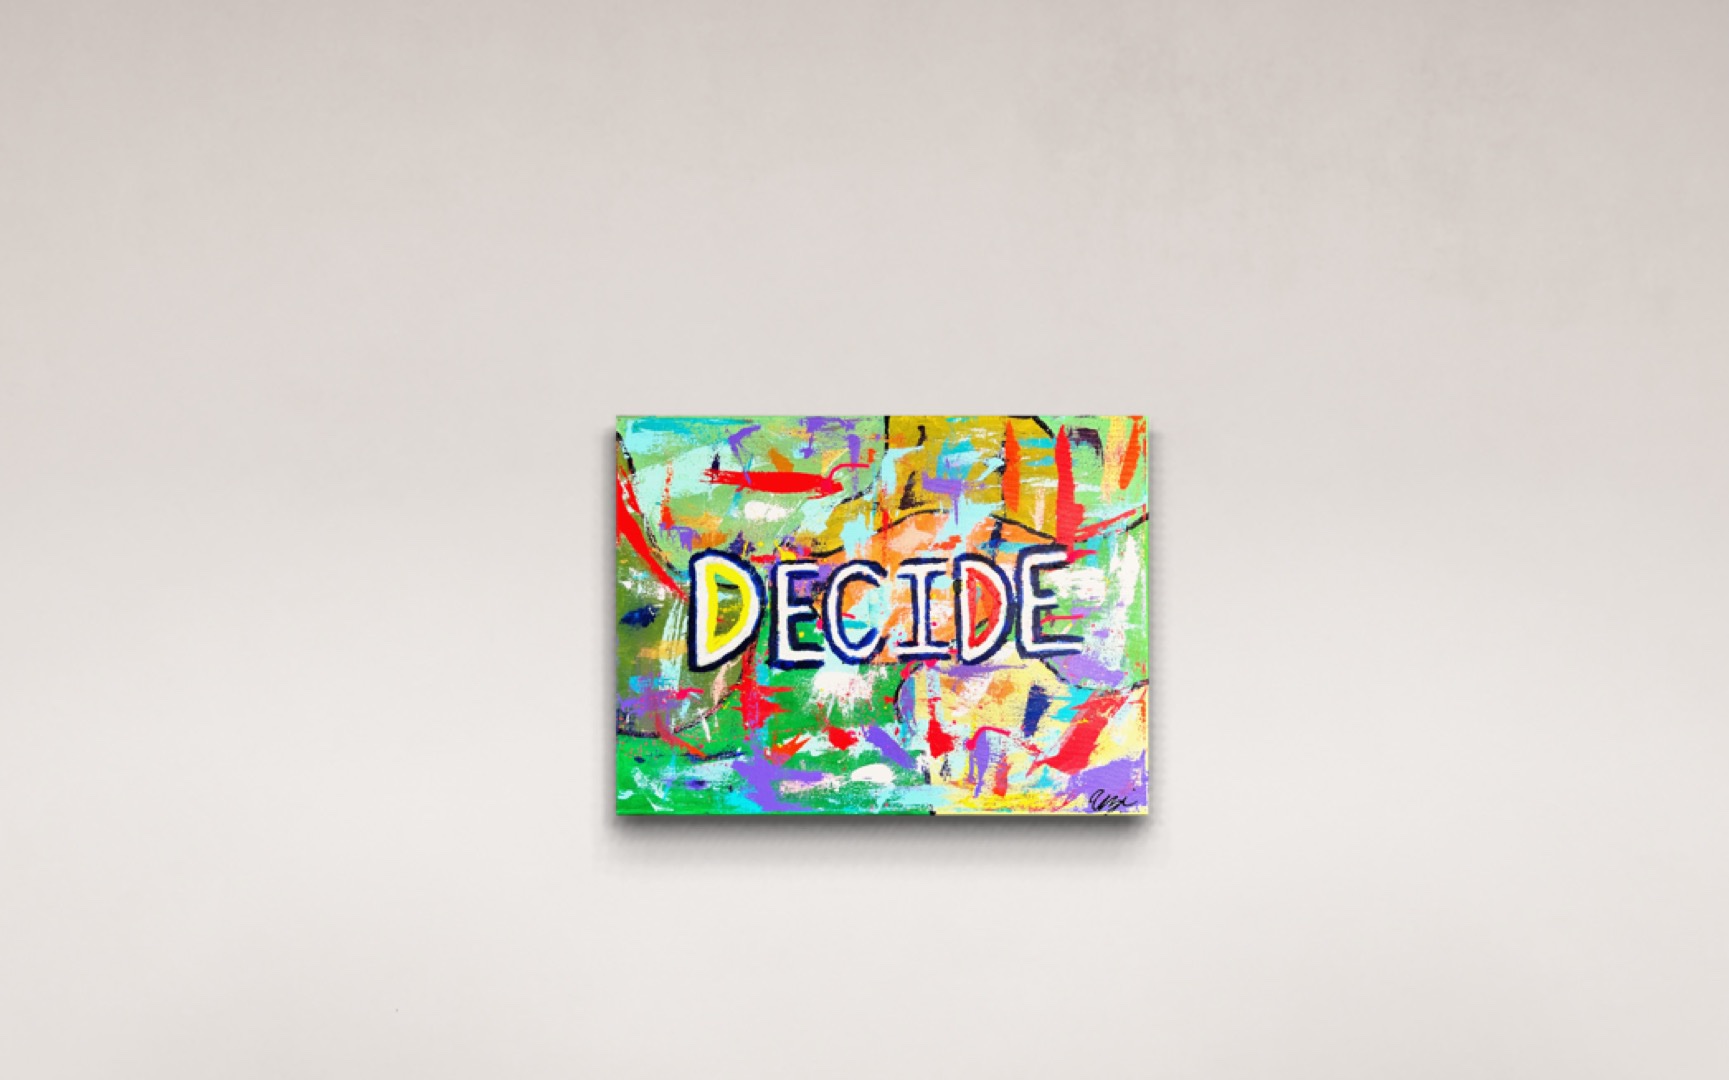 Decide acrylic paint with oil stick canvas for sale by Uzoma Obasi Uzoma Obasi | Abstract Art | Fine Art Prints | Cool Art